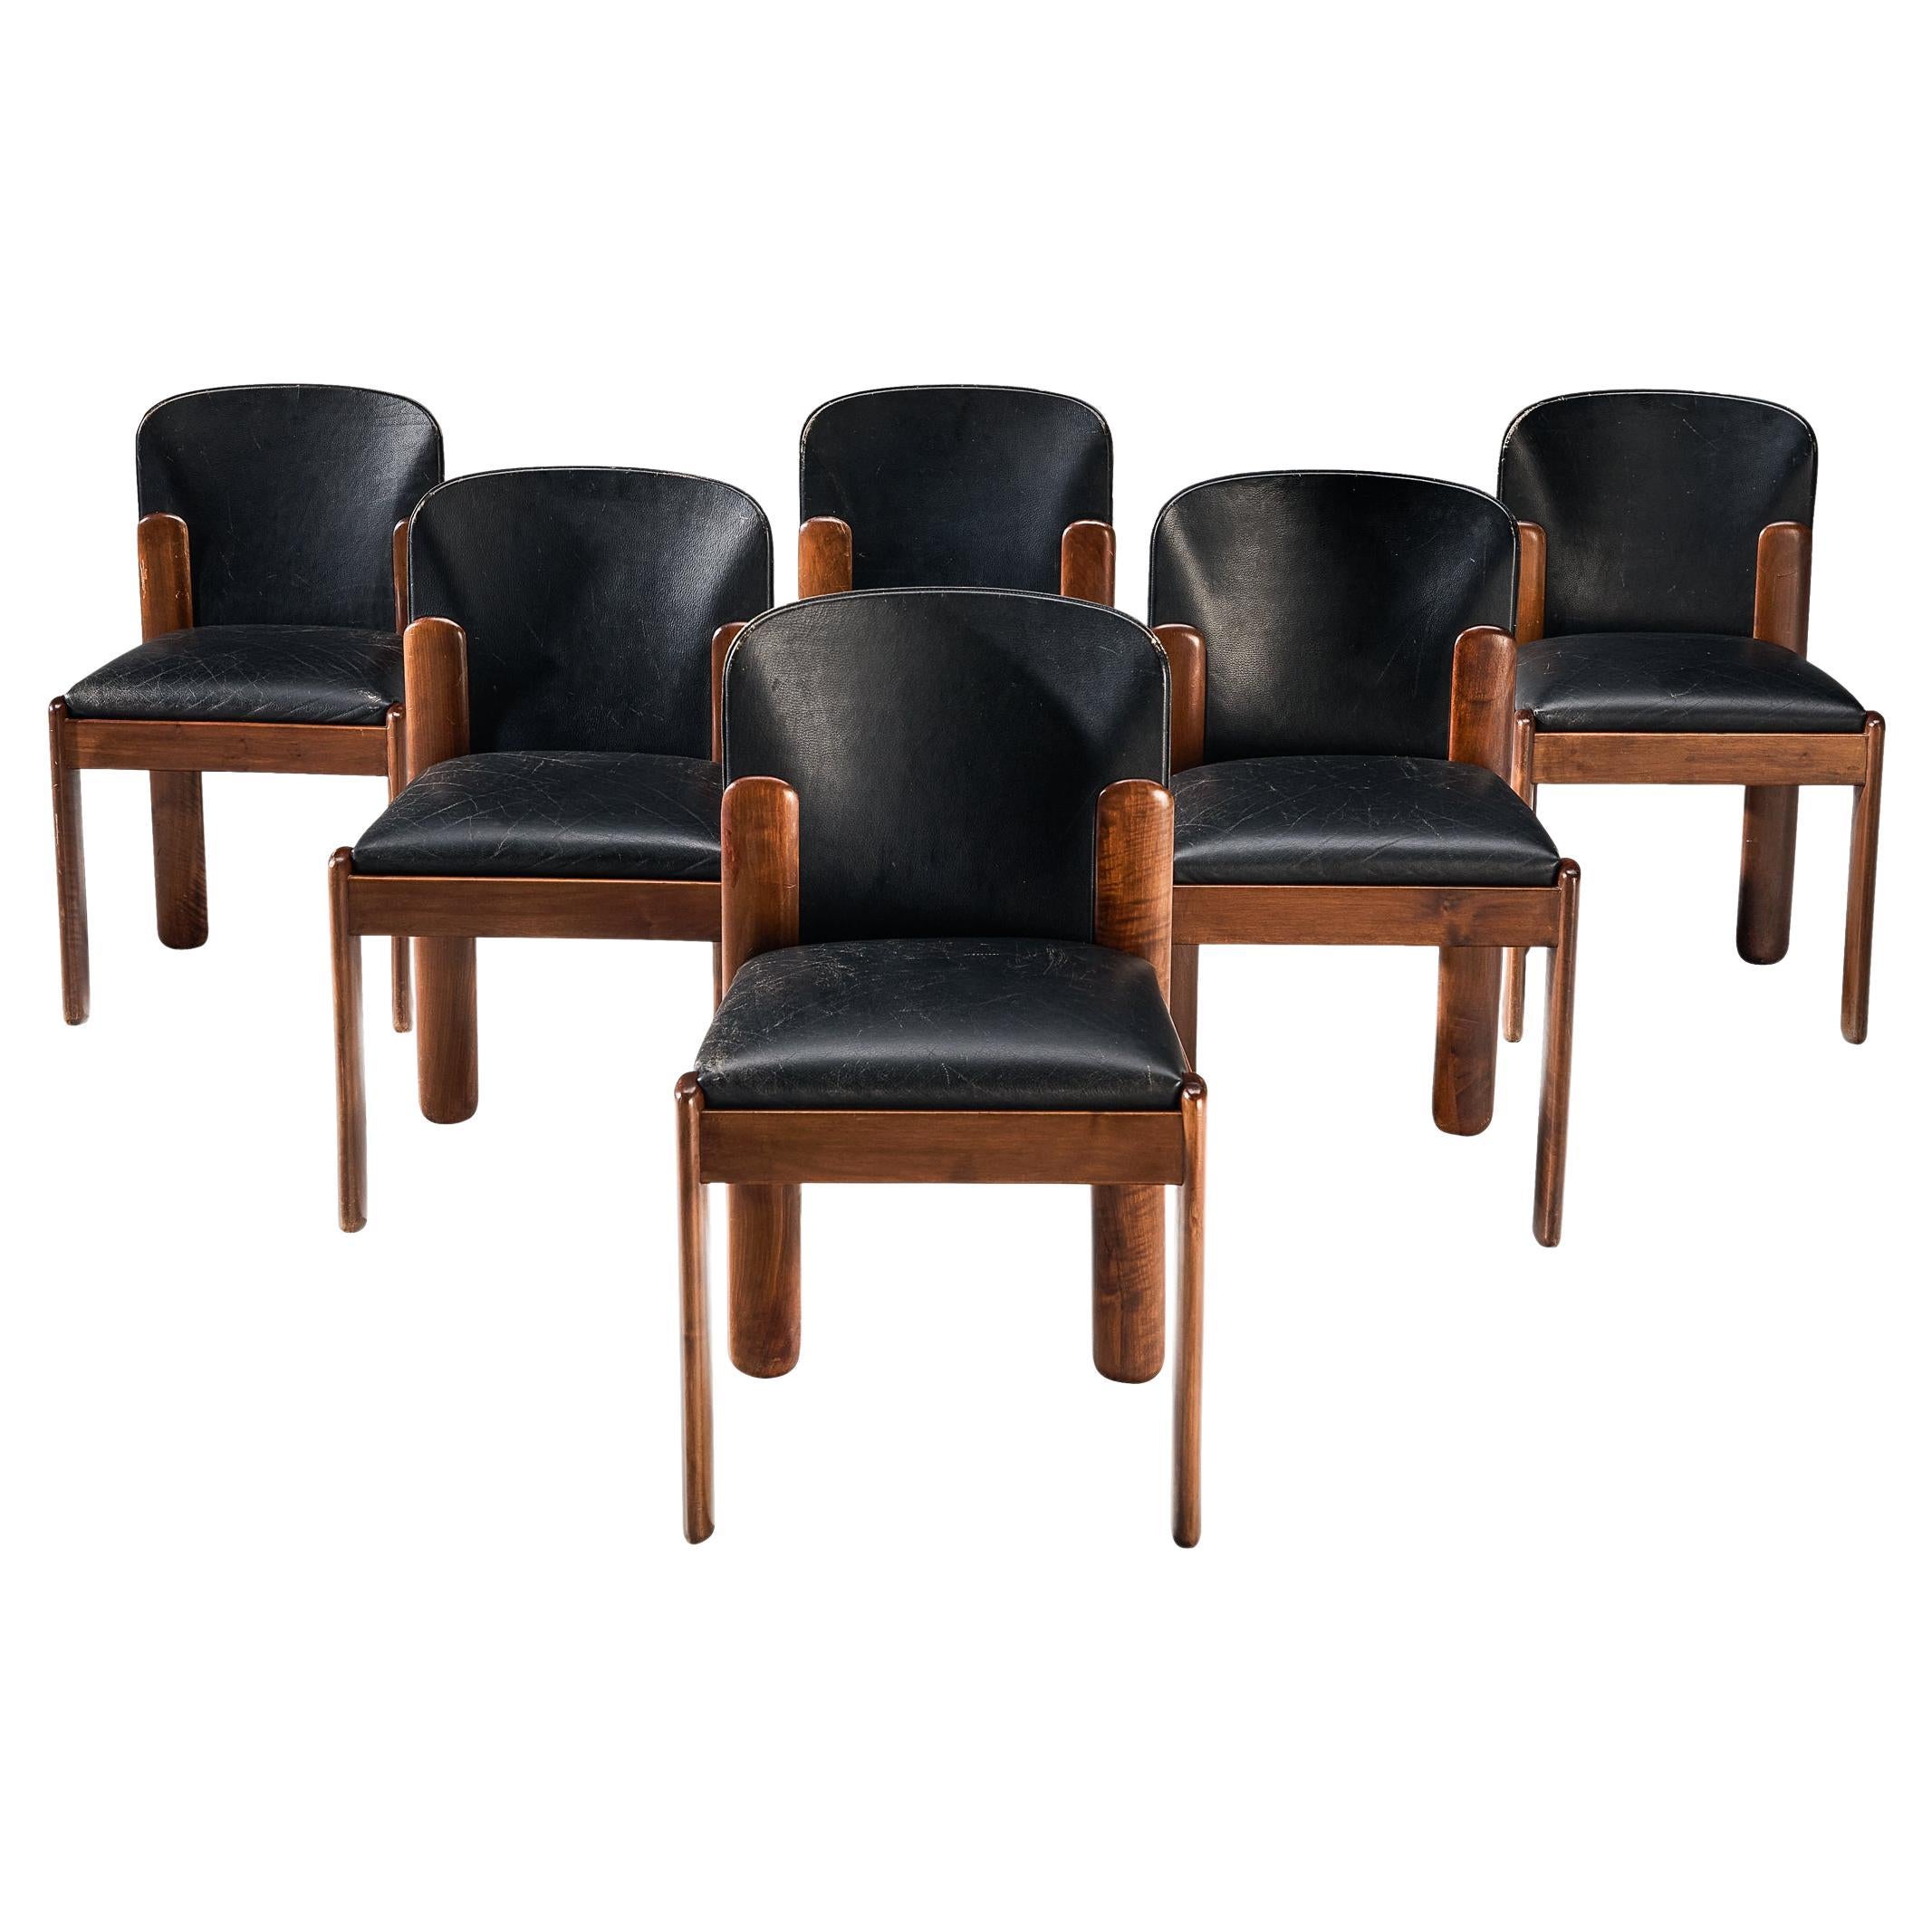 Silvio Coppola for Bernini Set of Six Dining Chairs in Walnut and Black Leather